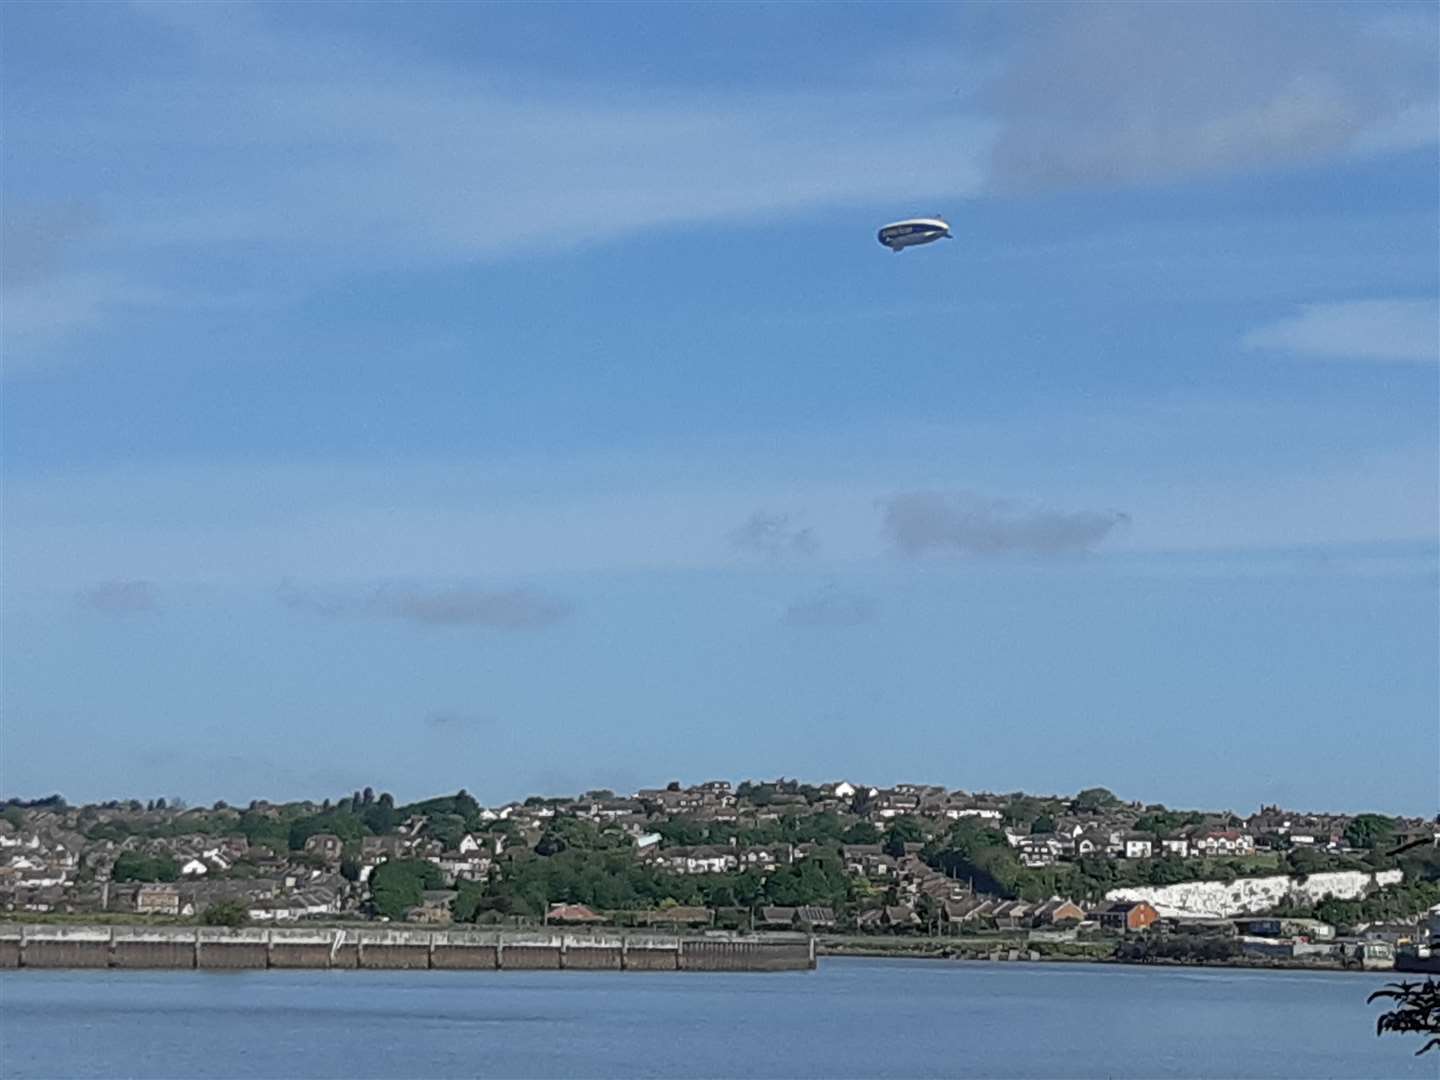 The Goodyear blimp flies above Medway. This was taken from the Medway City Estate, Strood, looking over to Rochester at about 9.15am